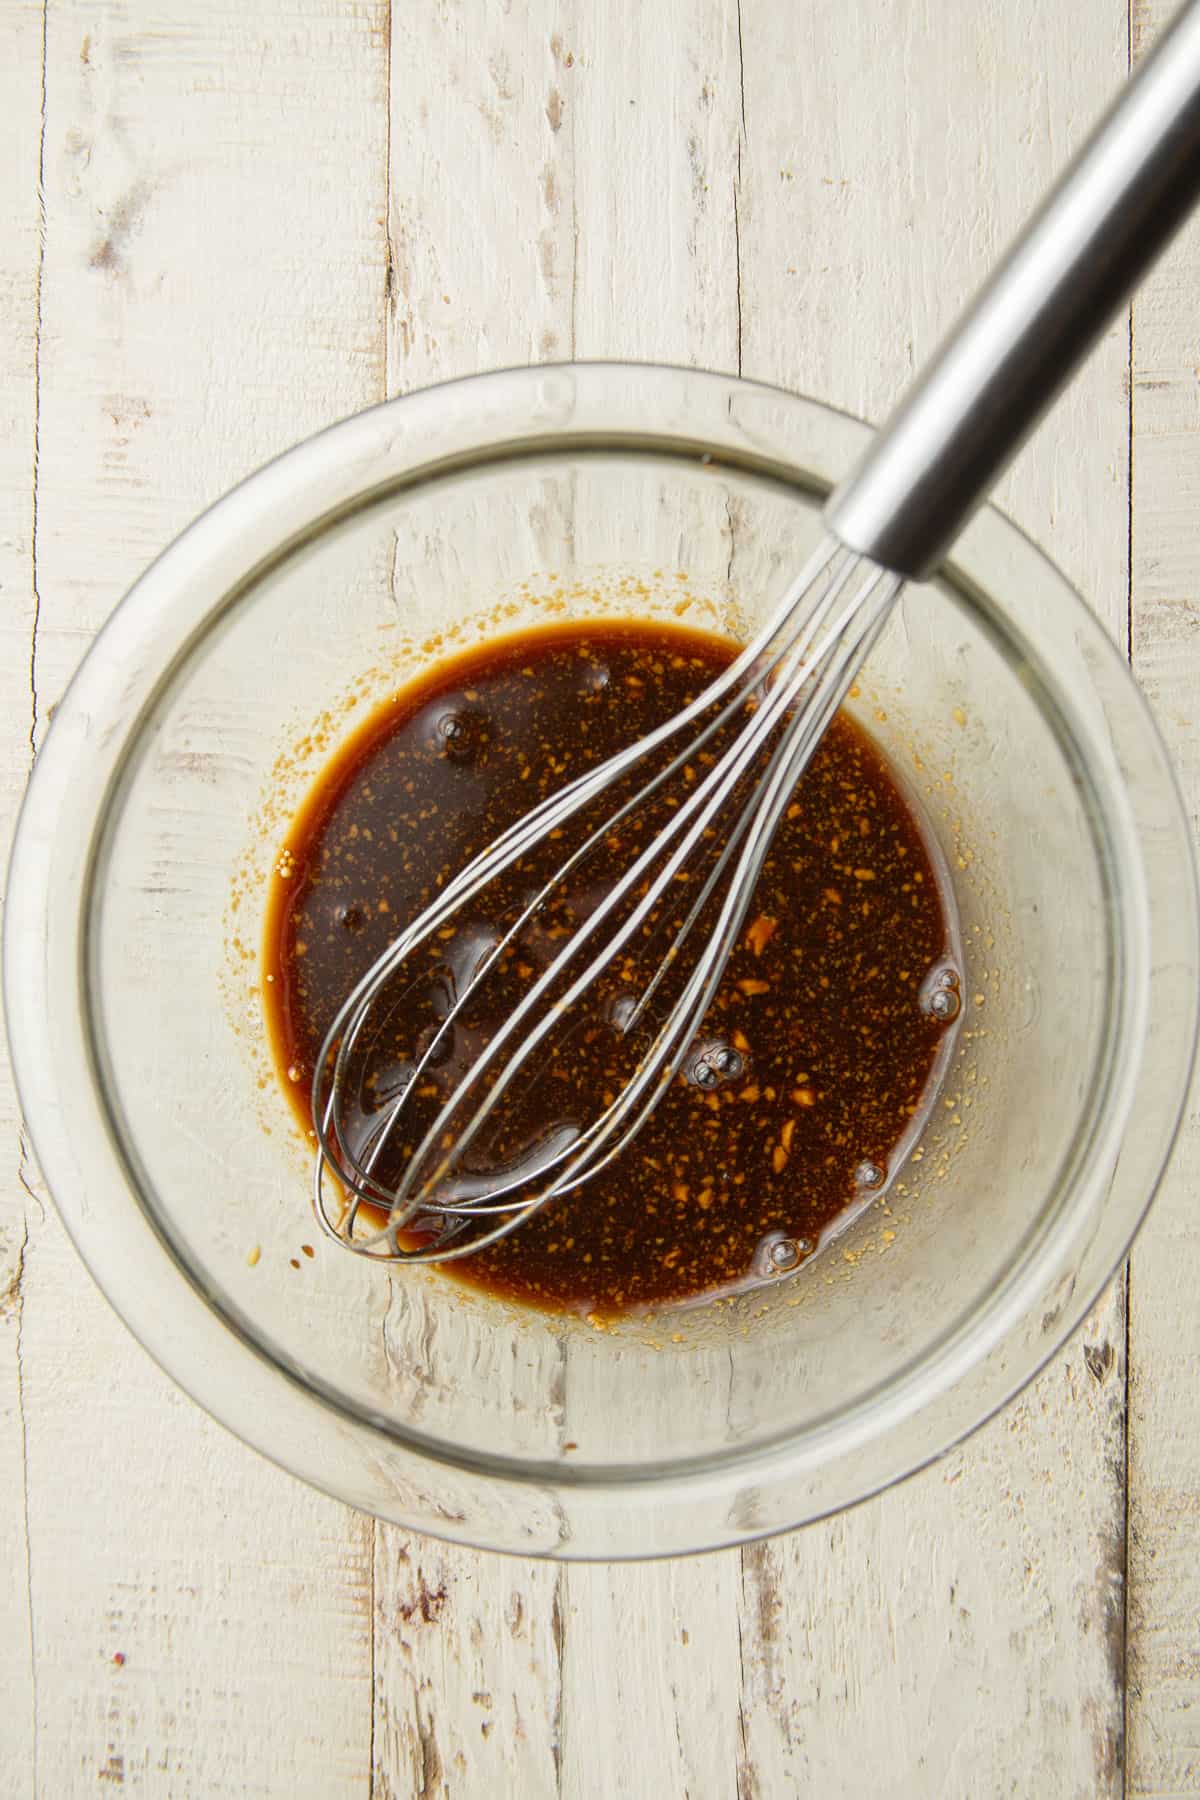 Balsamic sauce in a glass bowl with wire whisk.